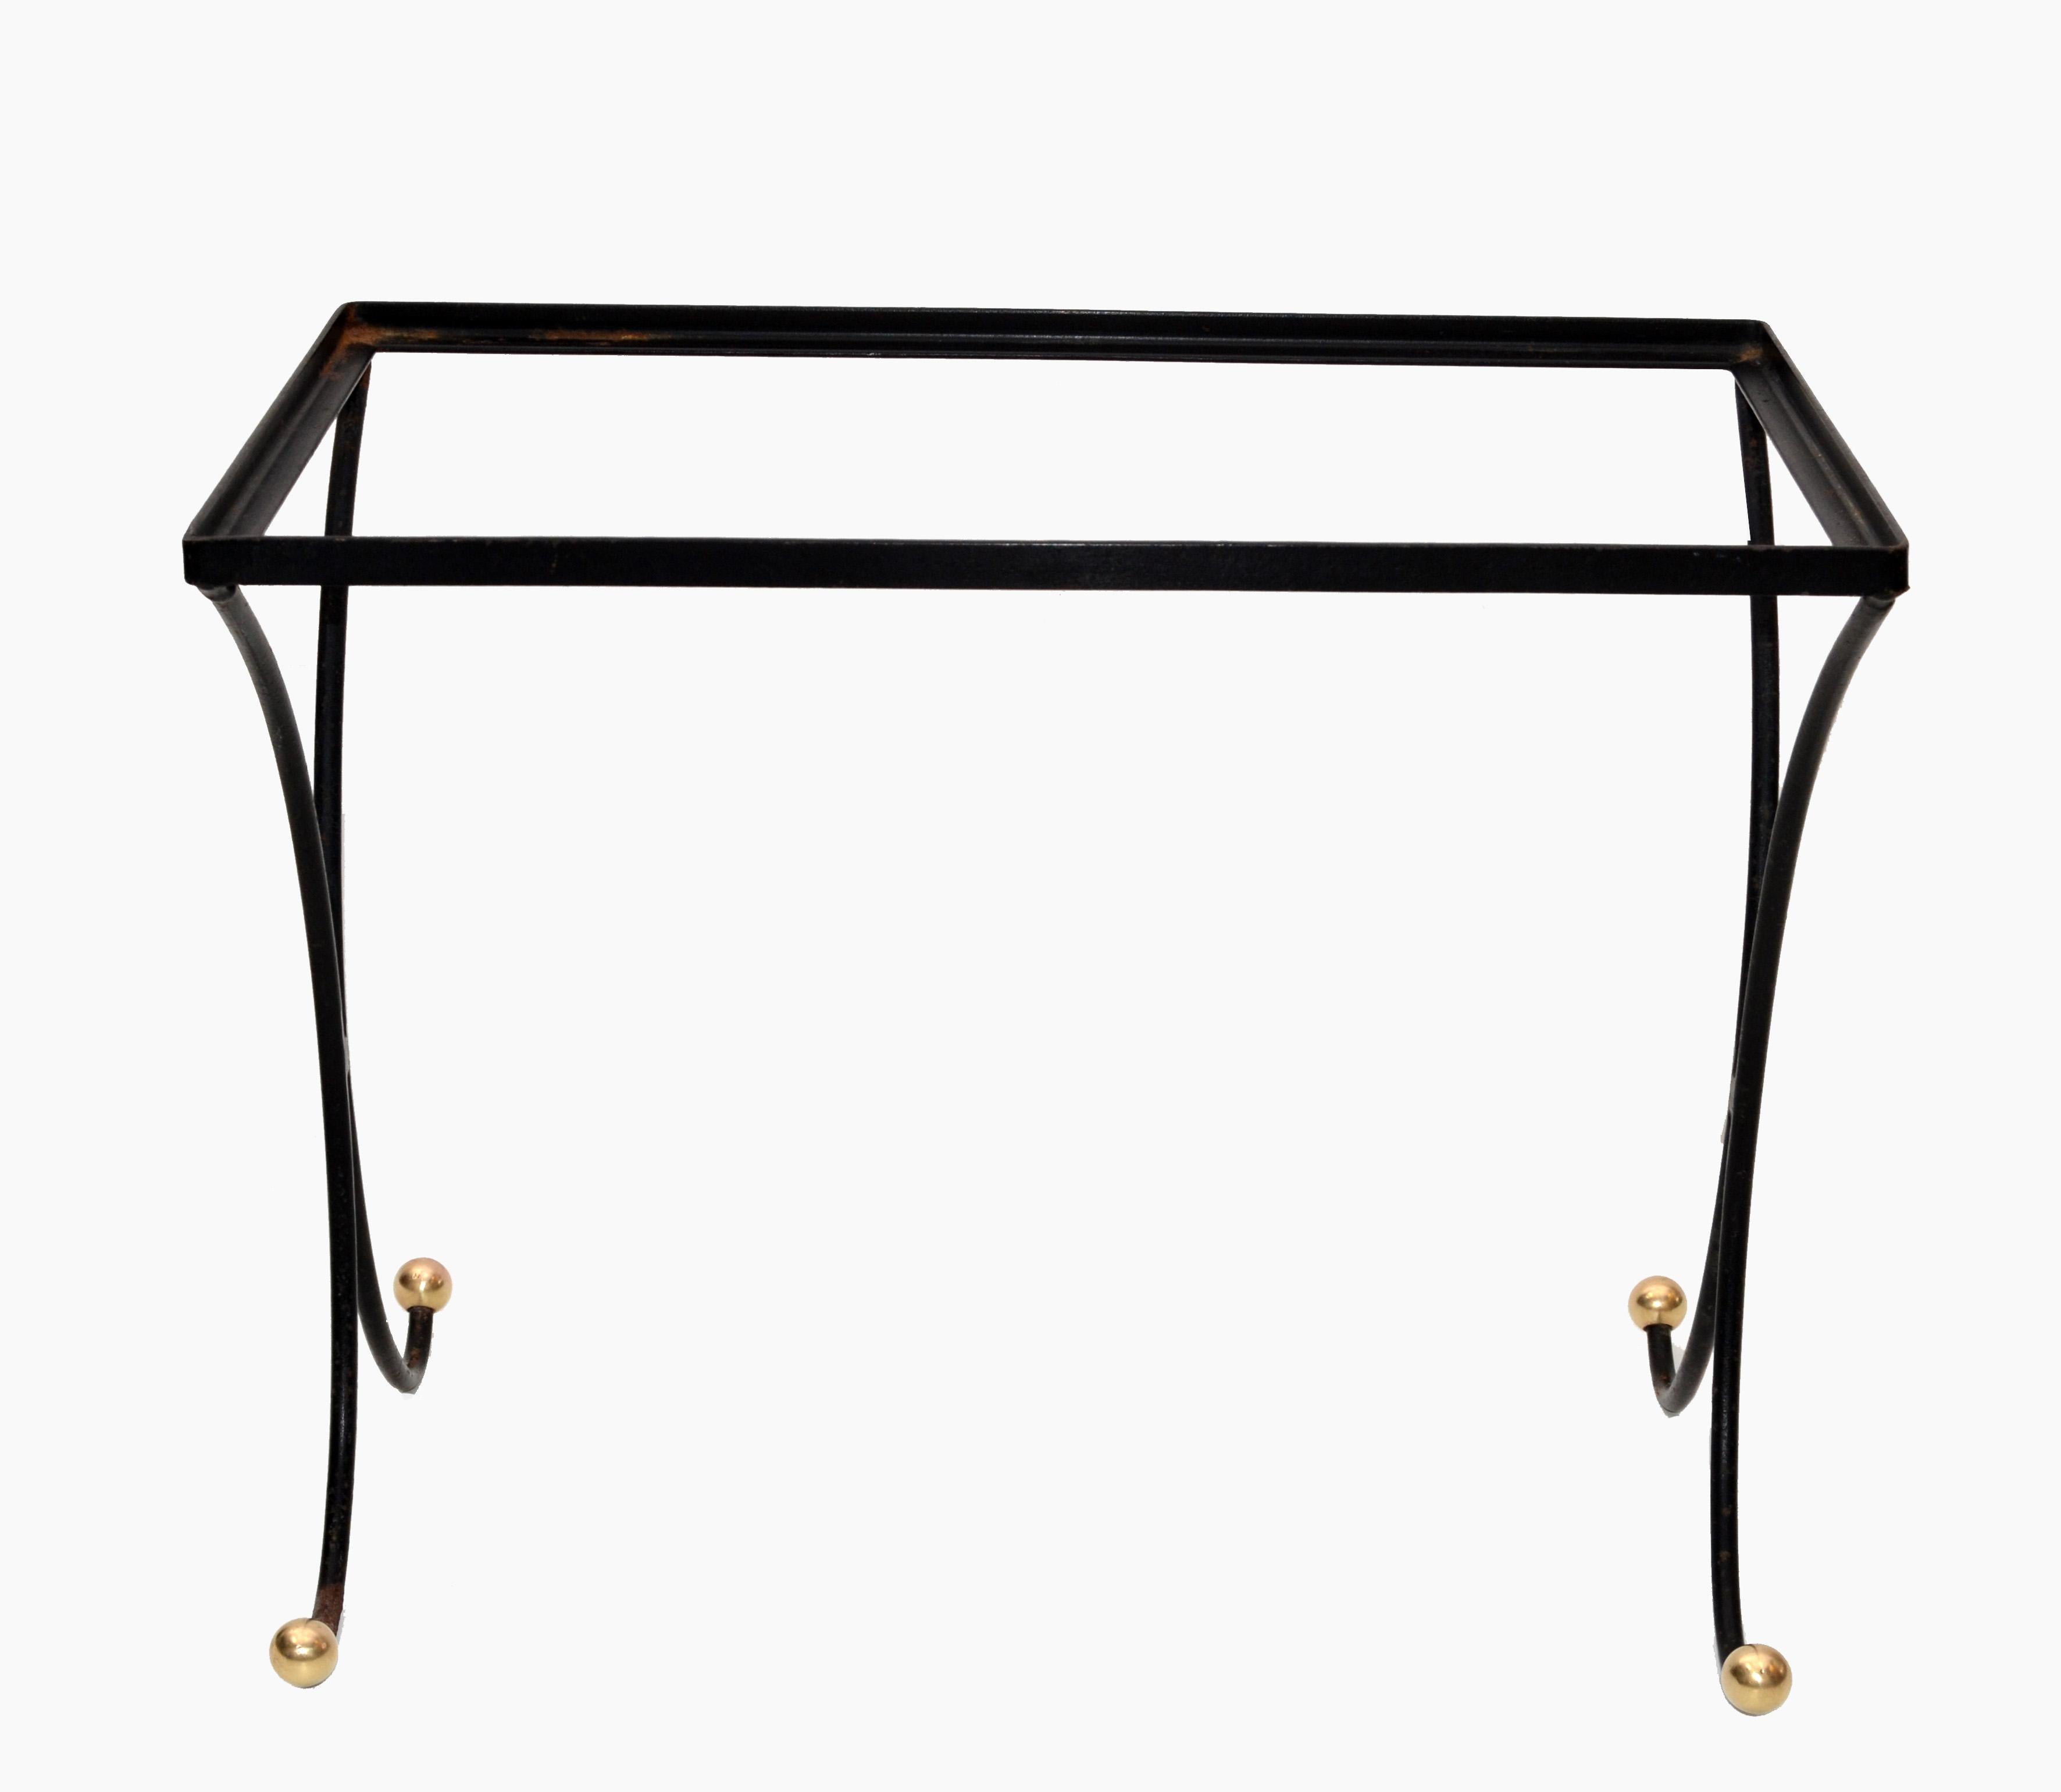 French Mid-Century Modern Black Wrought Iron & Brass Side Table Black Glass Top For Sale 2